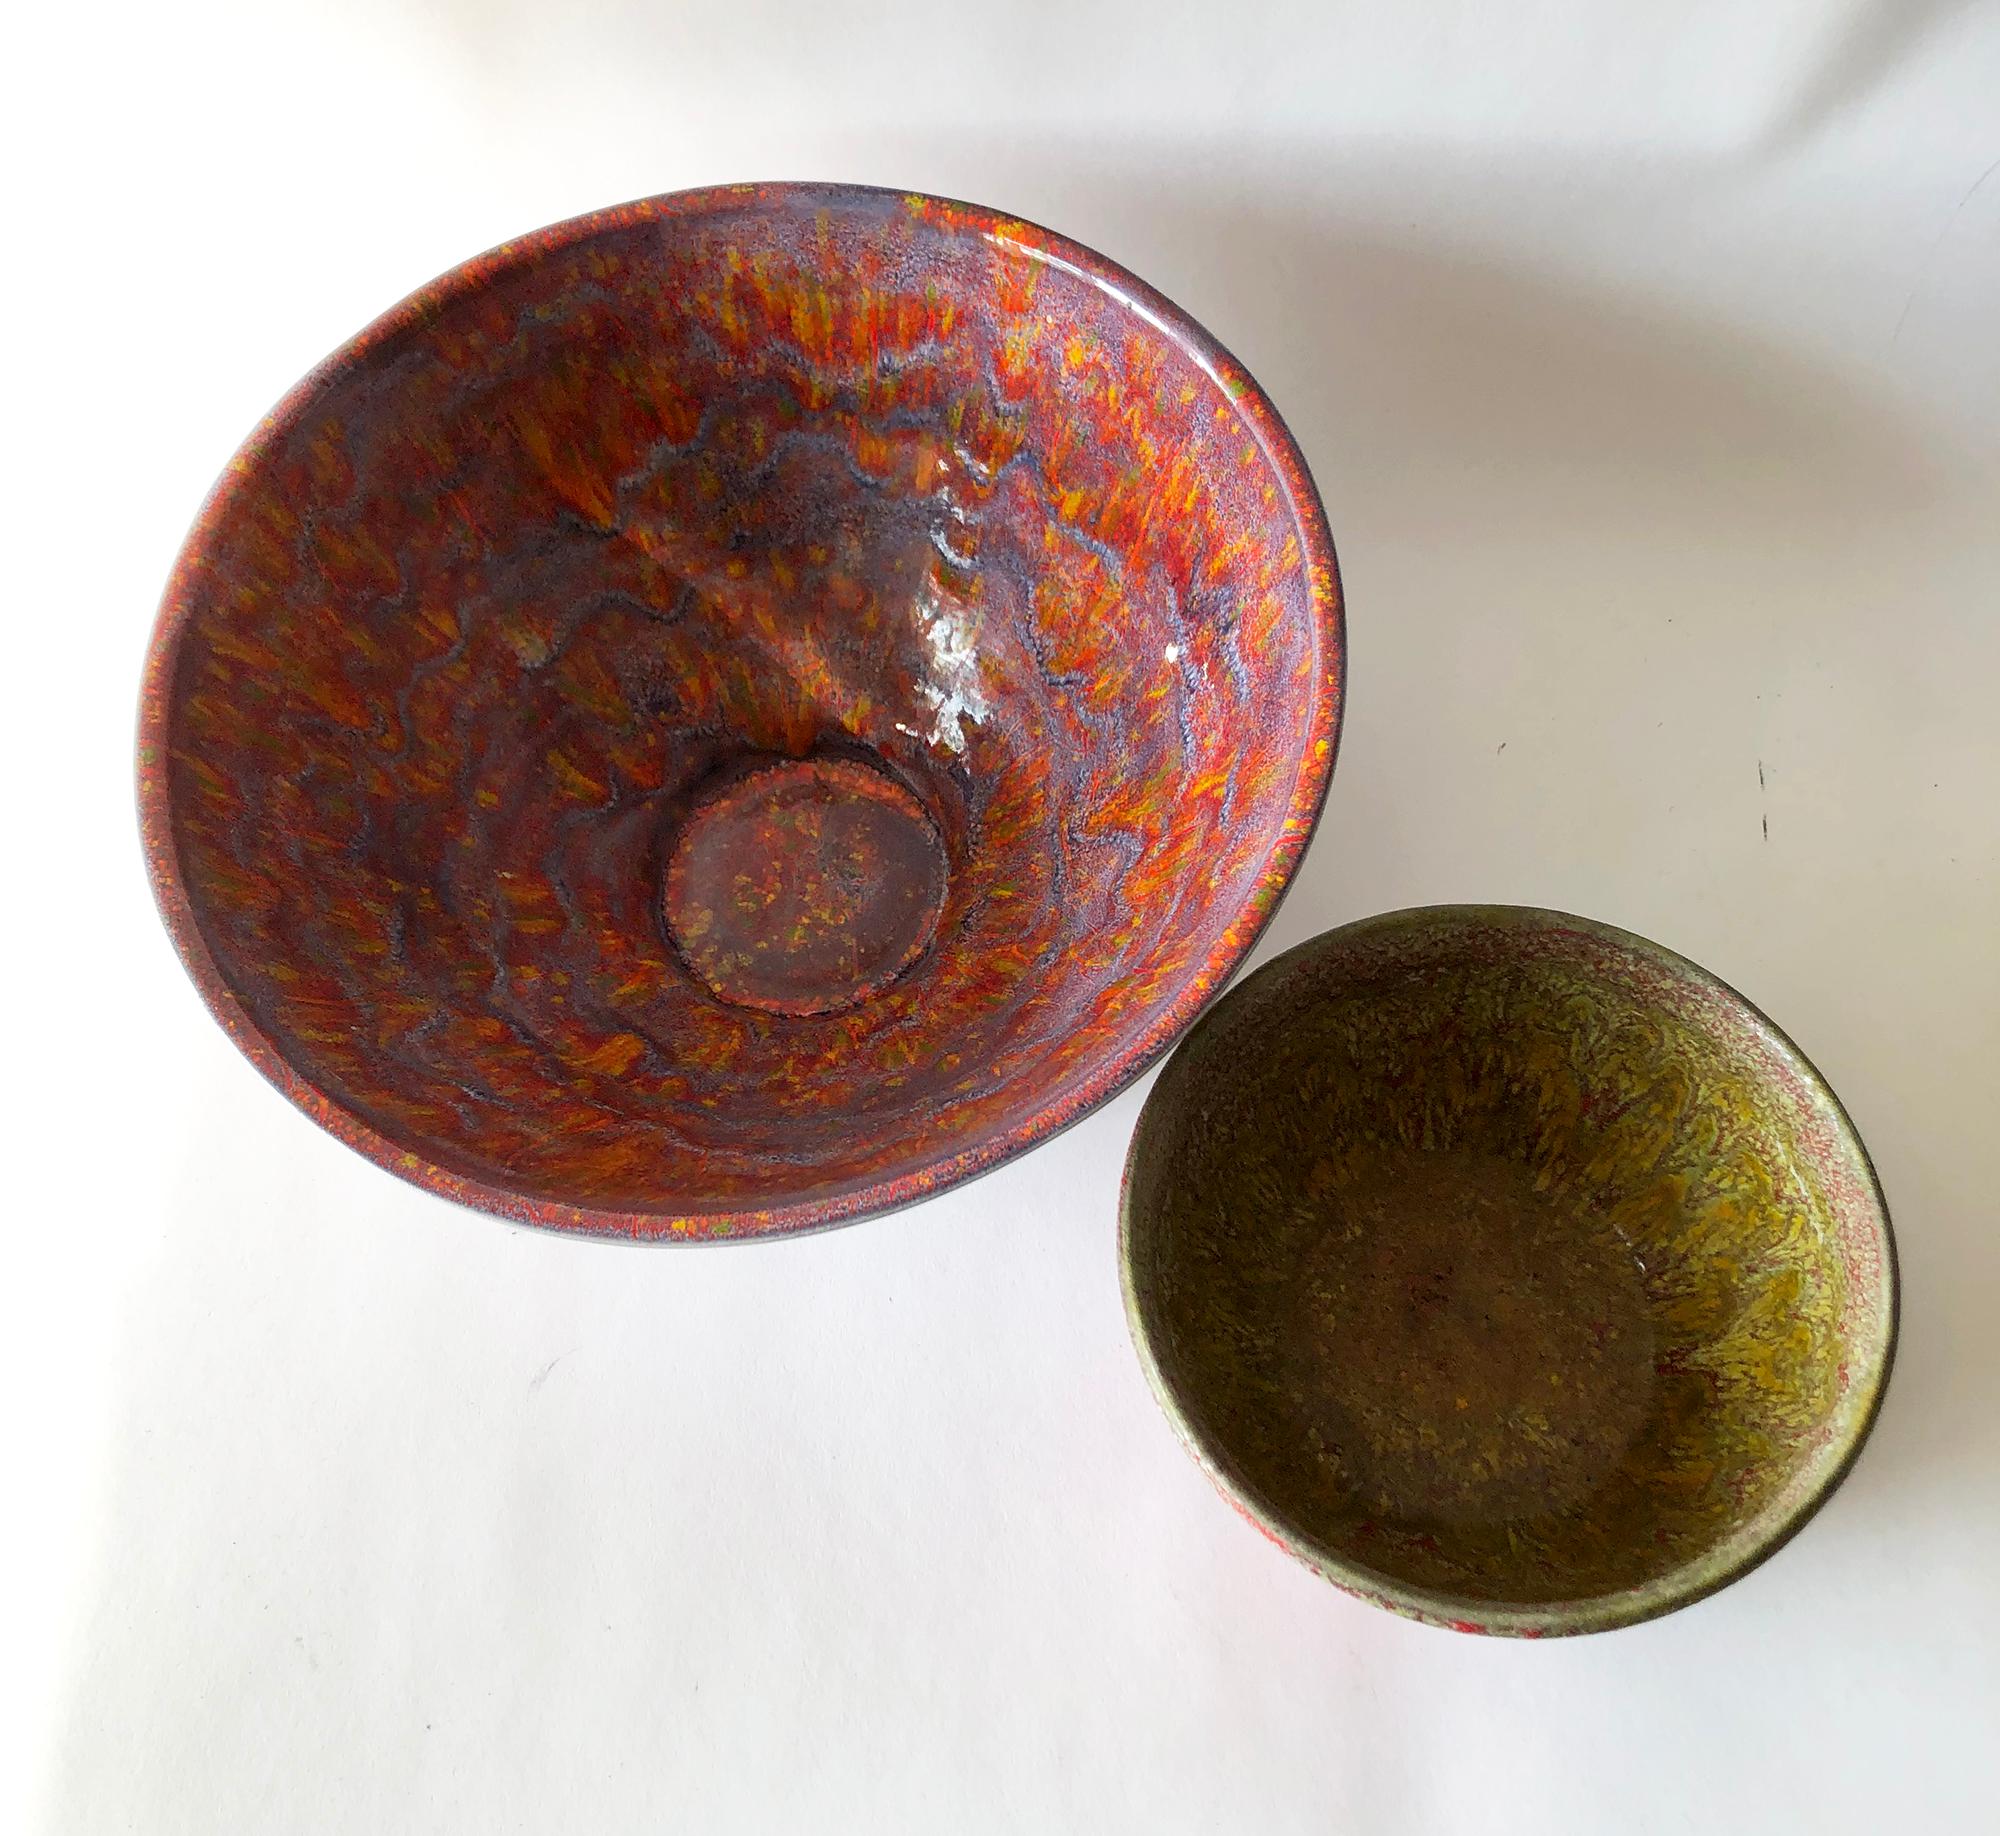 California studio pottery bowls created by William and Polia Pillin of Los Angeles, California. Bowls measure 5